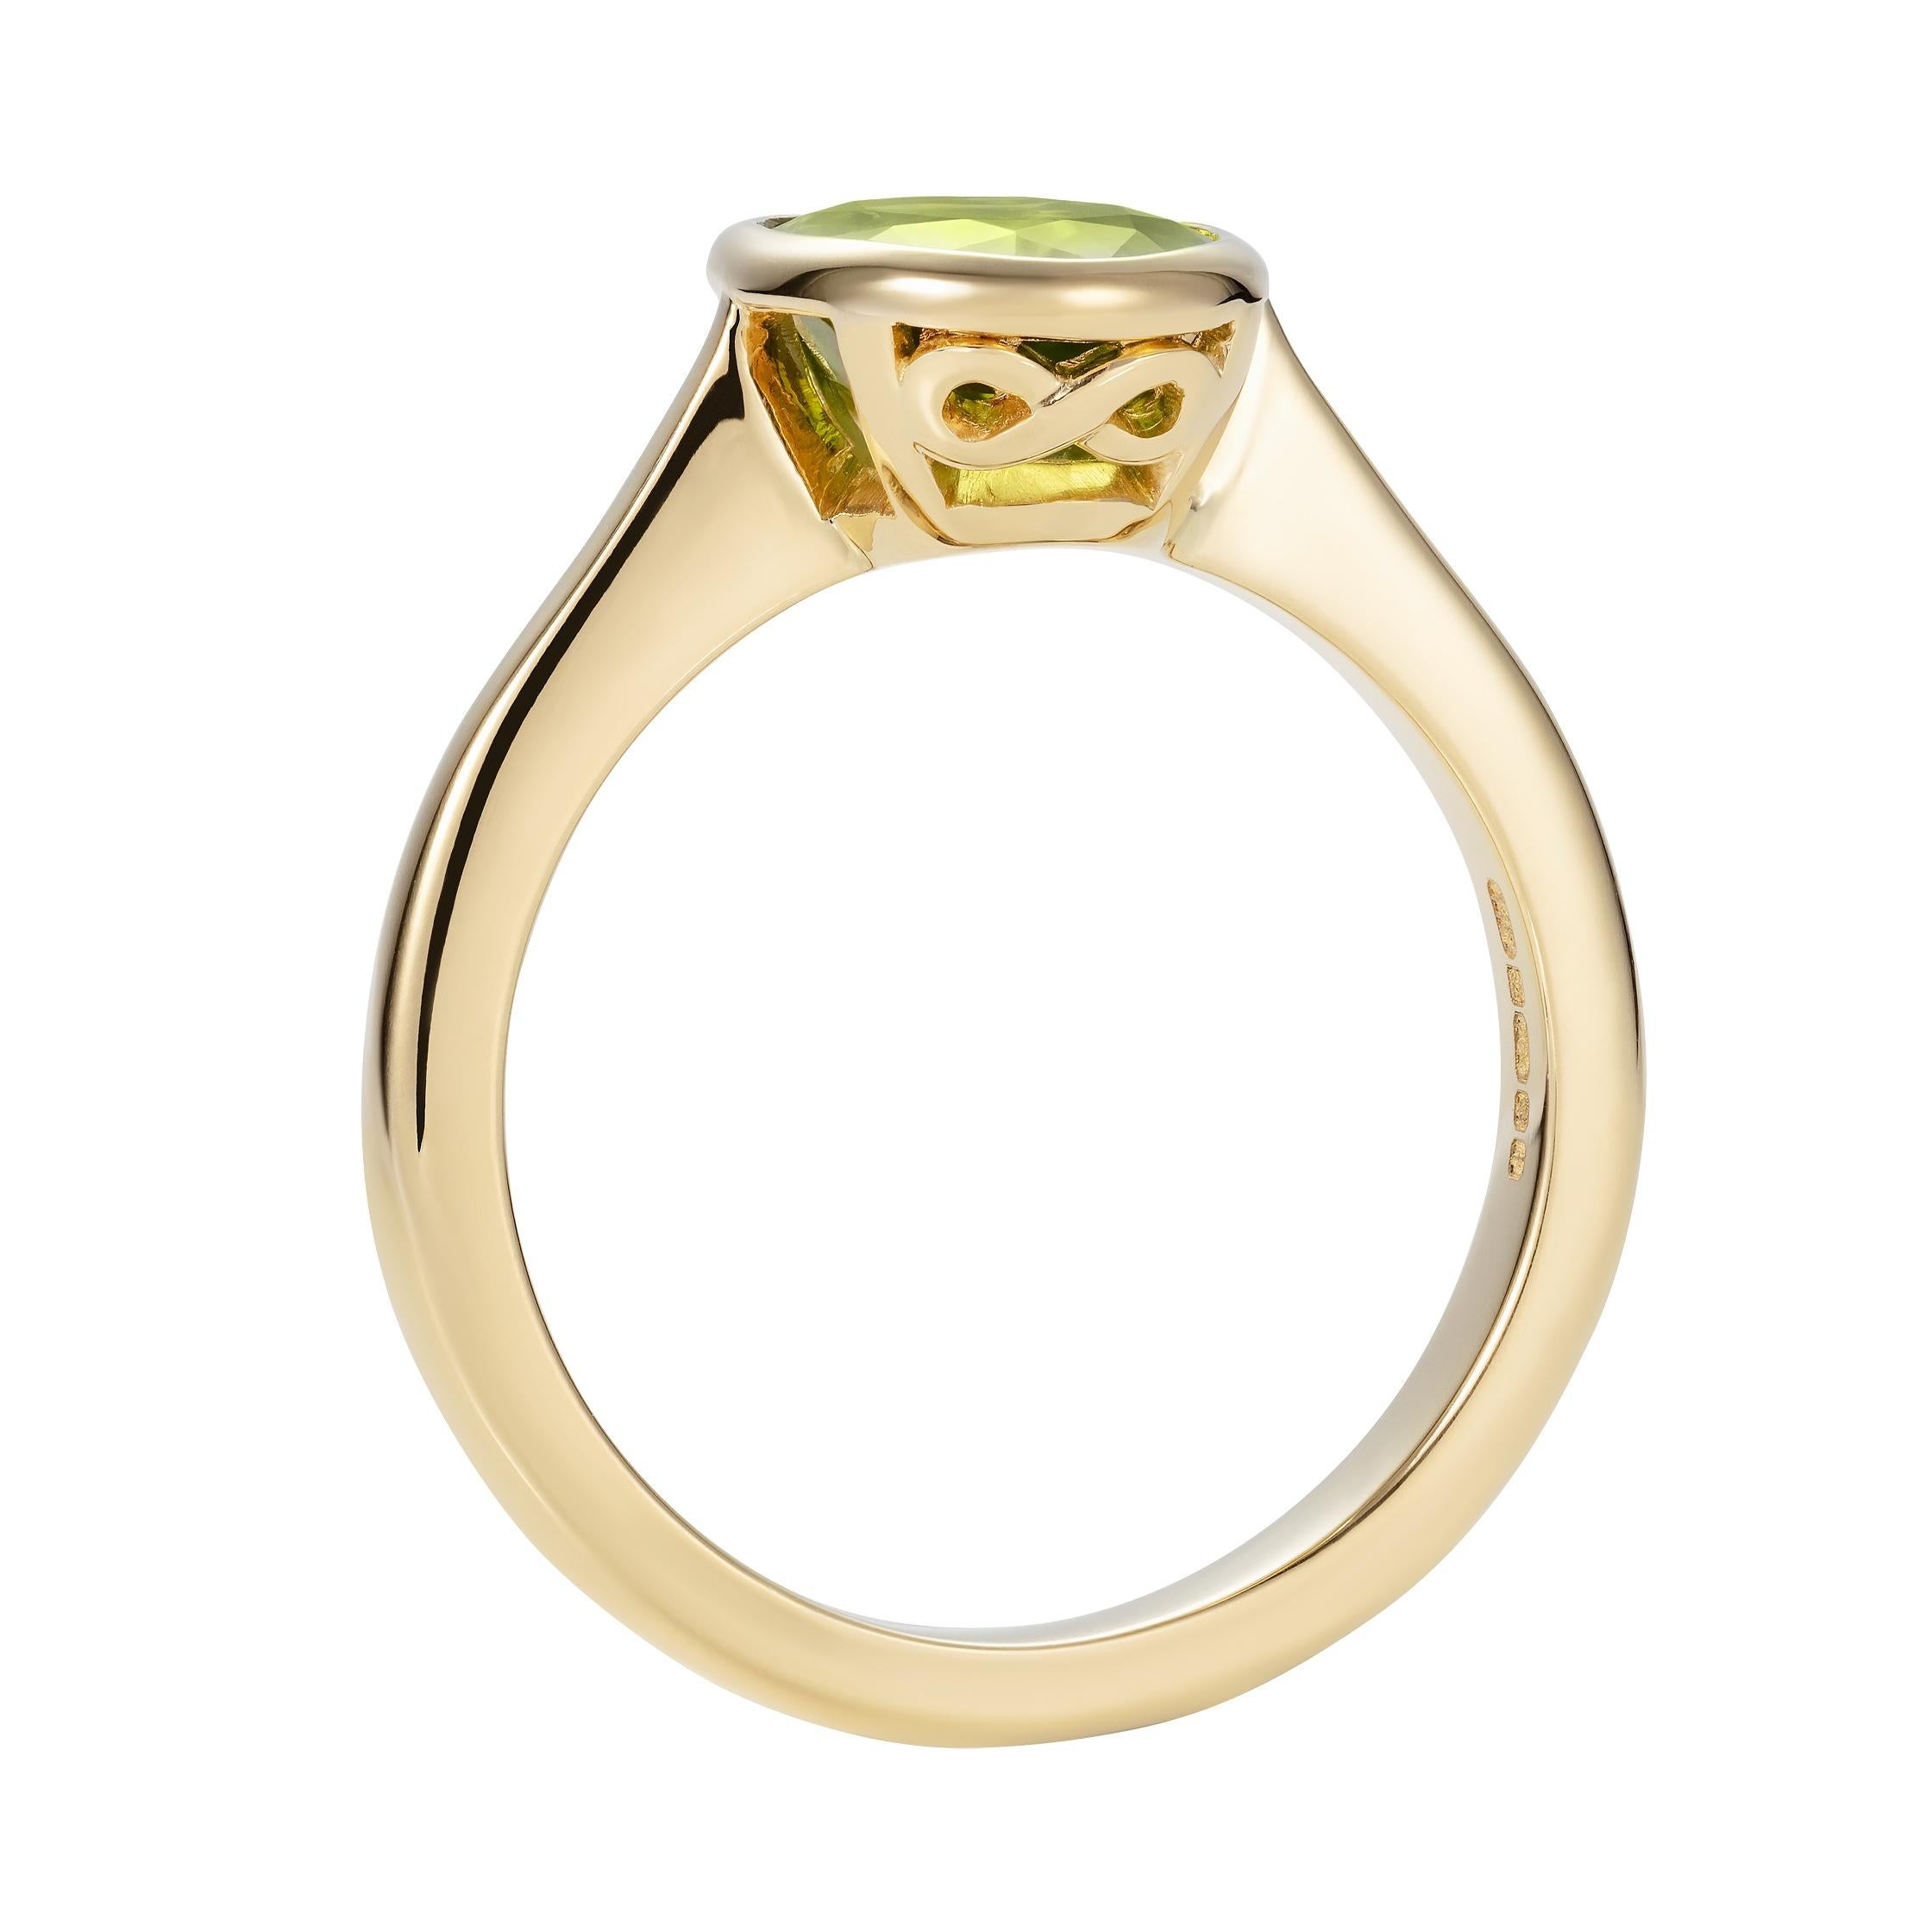 A beautiful oval peridot is harmoniously set in our Hirsh Venus setting with our unique infinity mark on the side.

- 2.12 carat oval peridot
- Created in 18K yellow gold, handmade in London

Formed deep within the earth and found on every